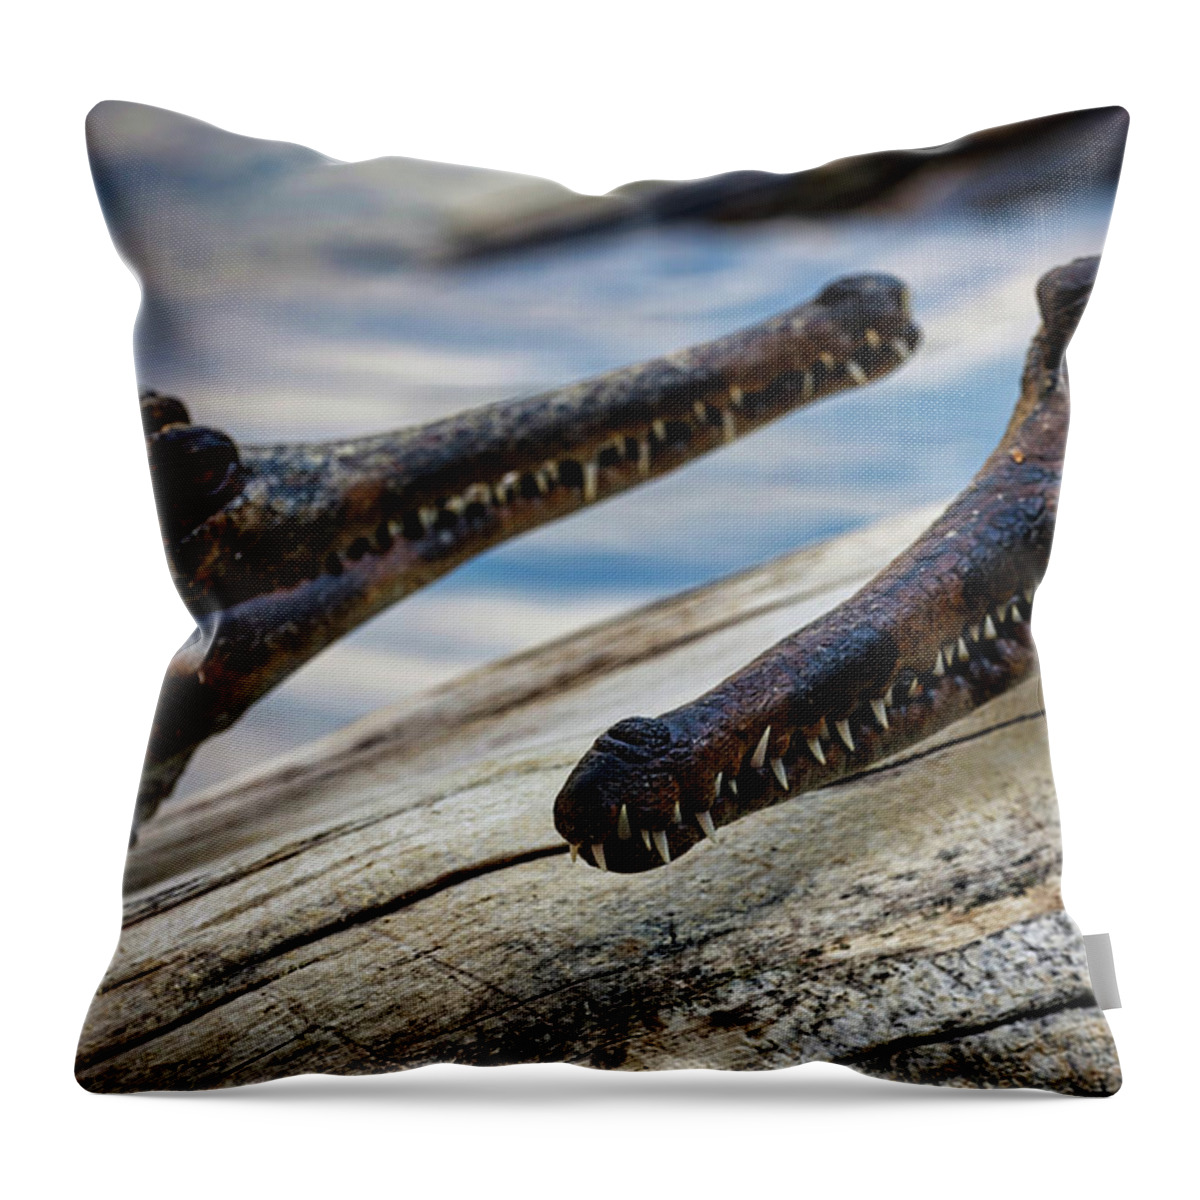 Gharial Throw Pillow featuring the photograph Gharials Chilling by Rene Vasquez